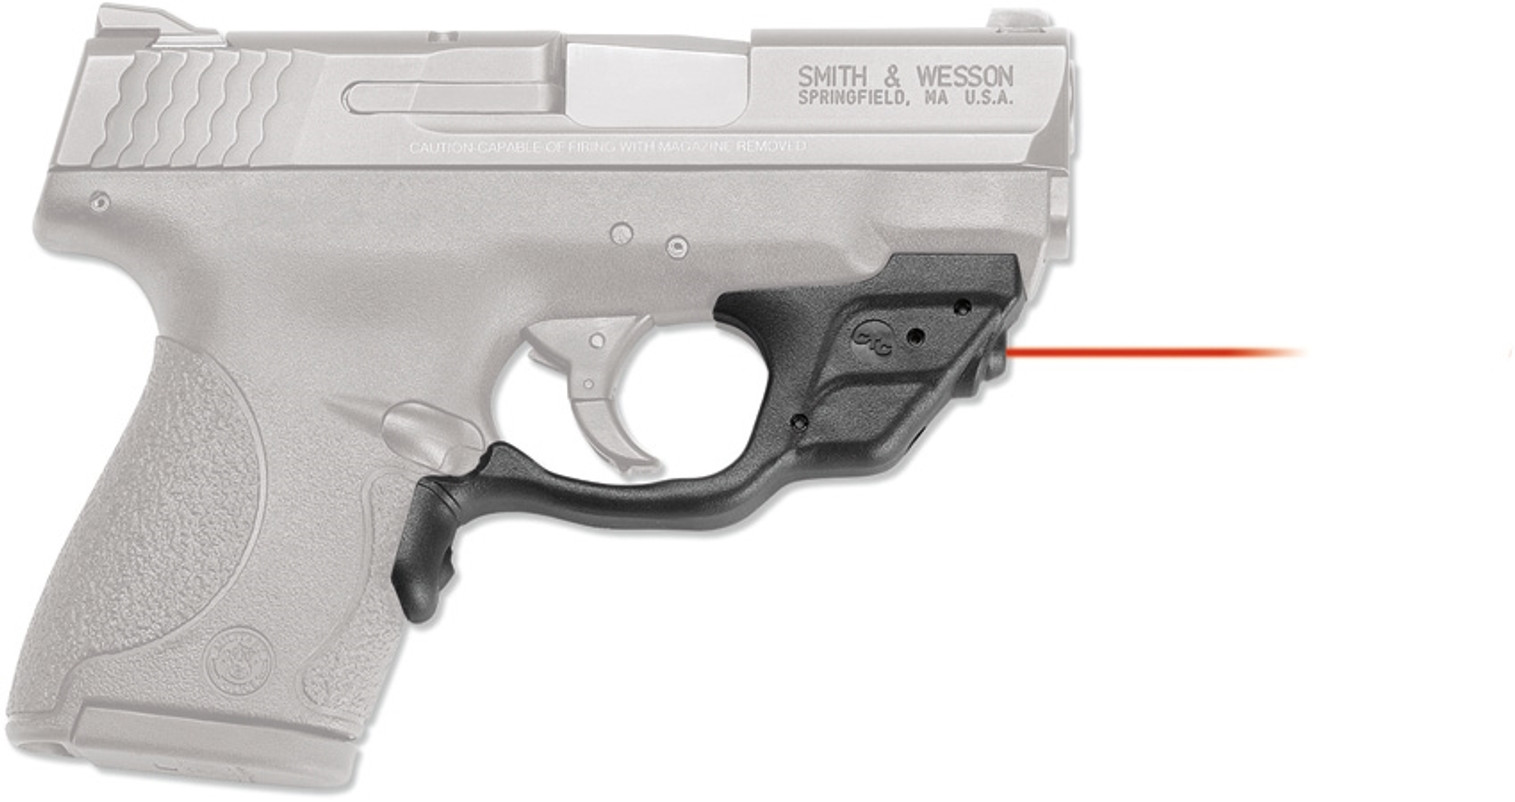 Laserguard Sight S&W Red